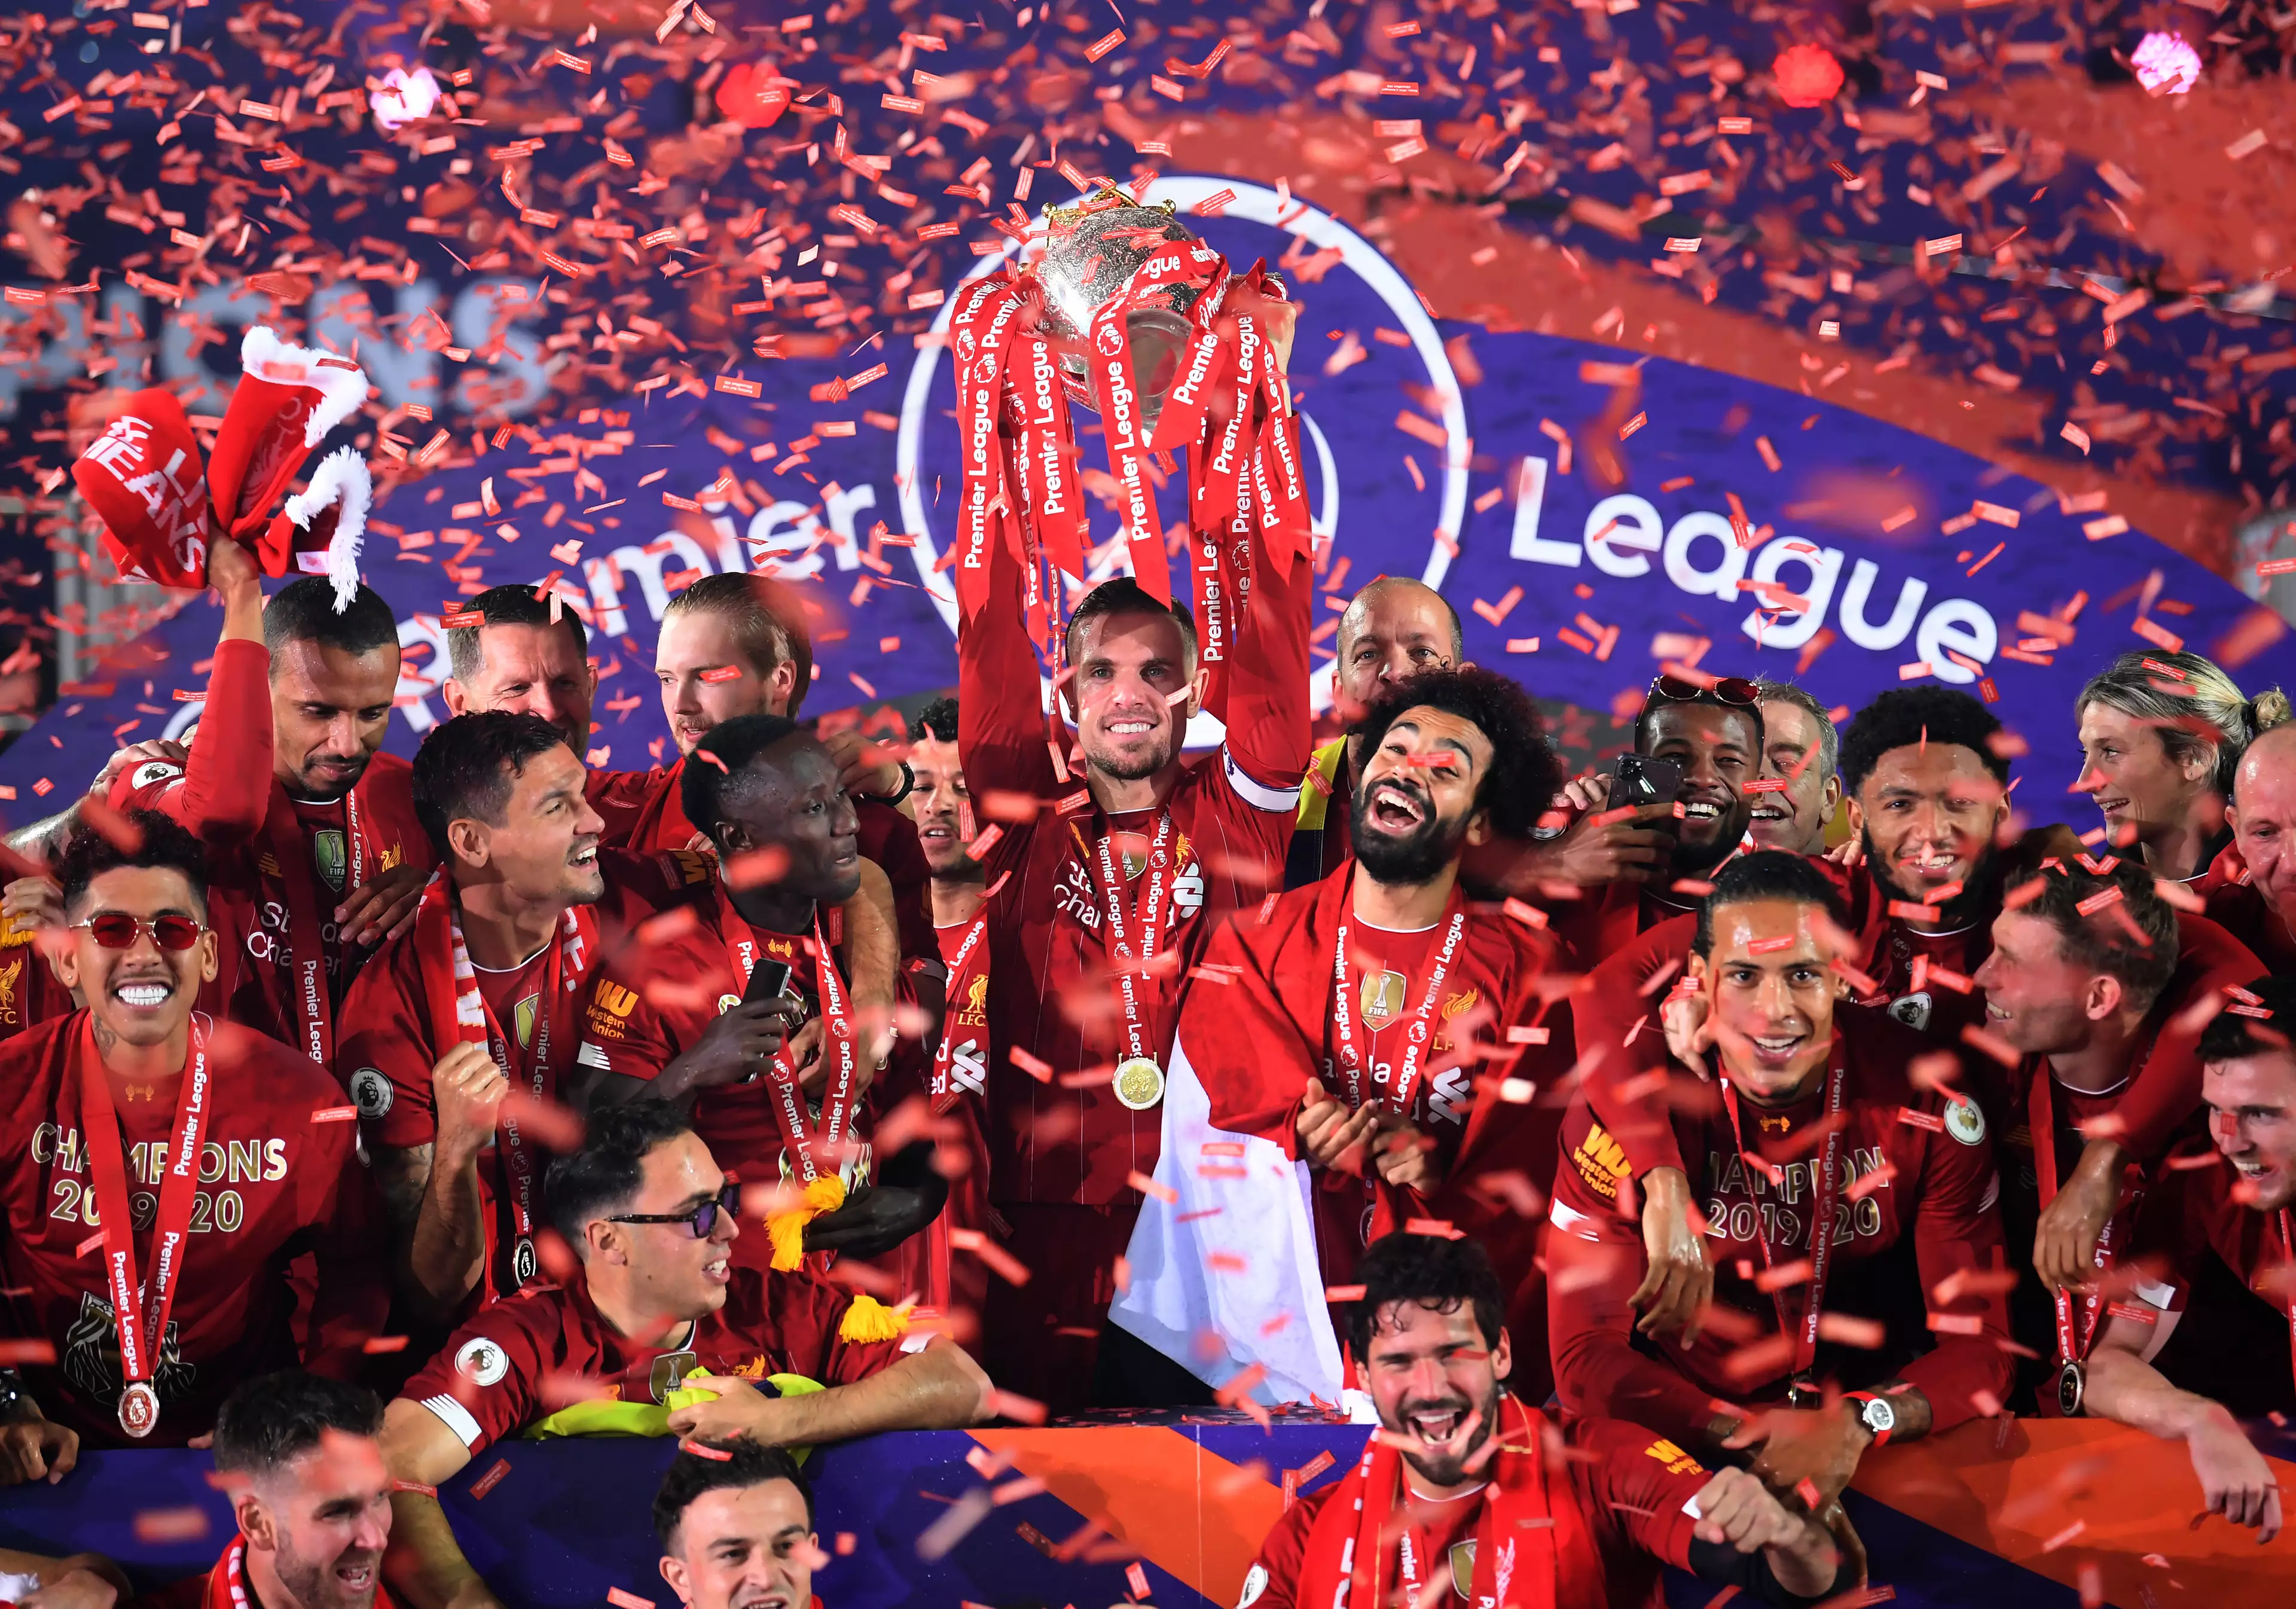 Current champions Liverpool are the ones pushing the new regulations. Image: PA Images